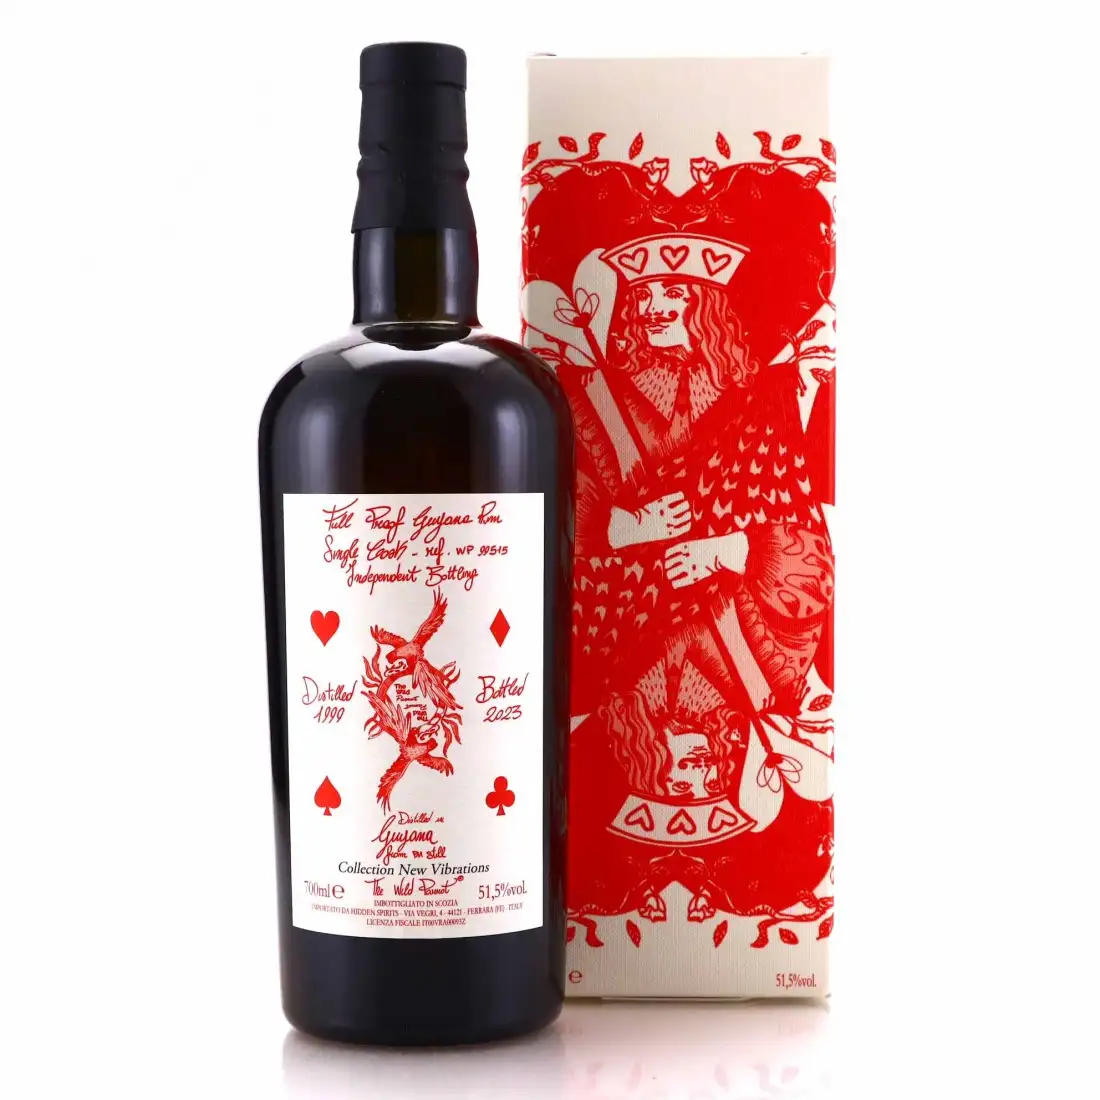 Image of the front of the bottle of the rum Hidden Spirits (LMDW)